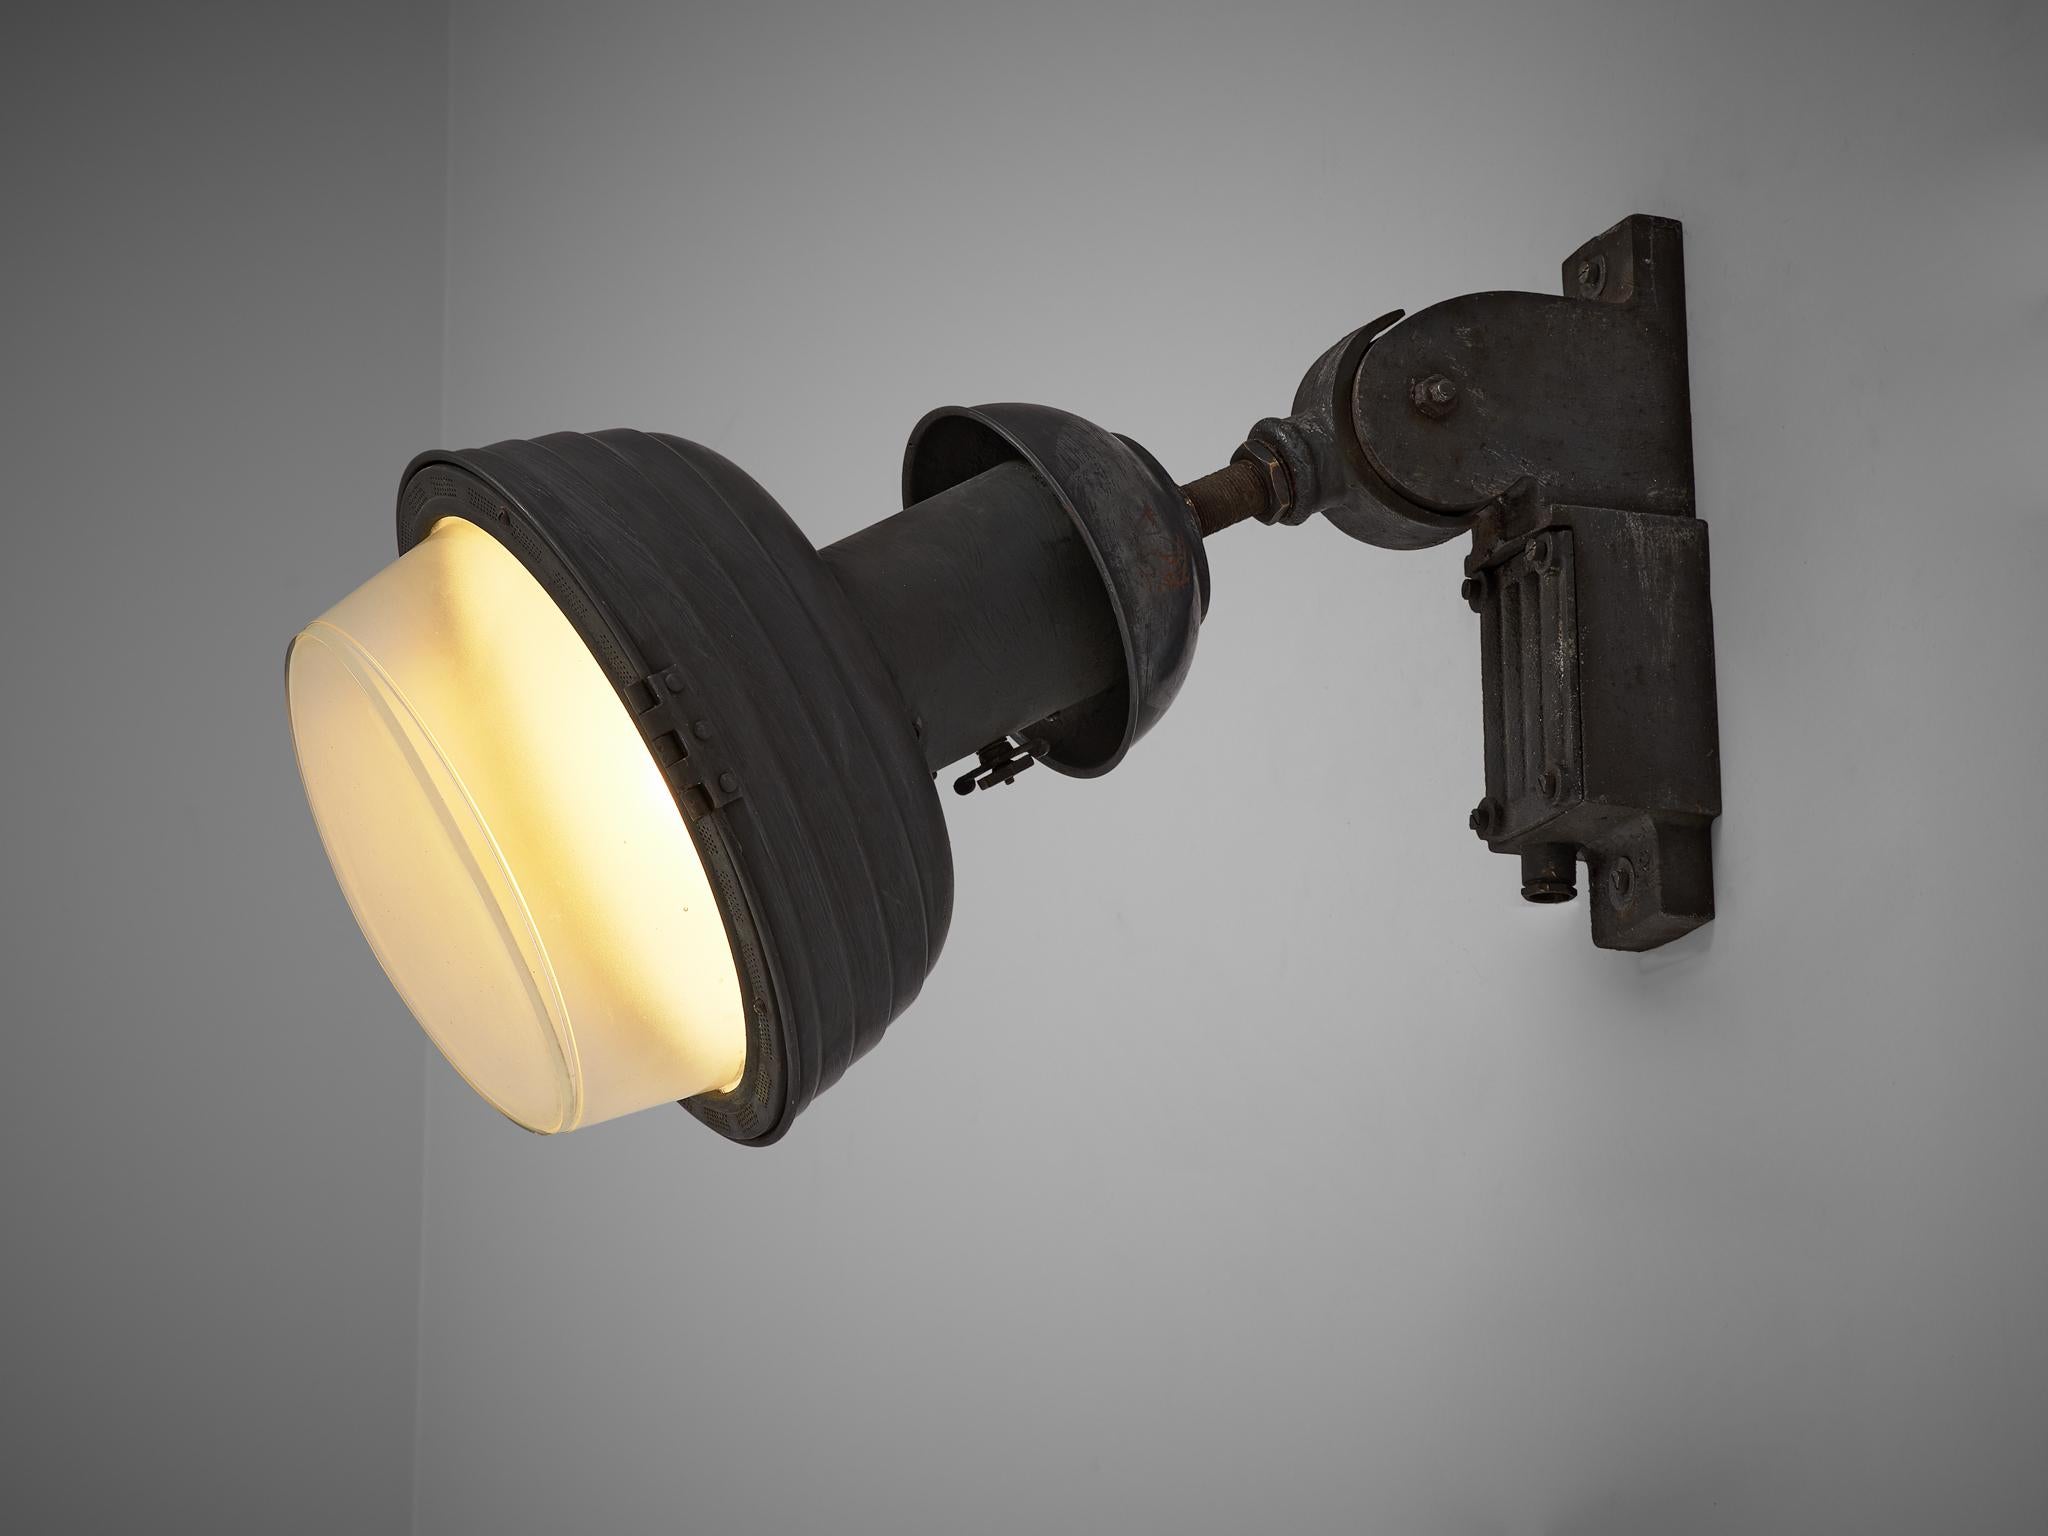 European Set of Industrial Wall Lamps